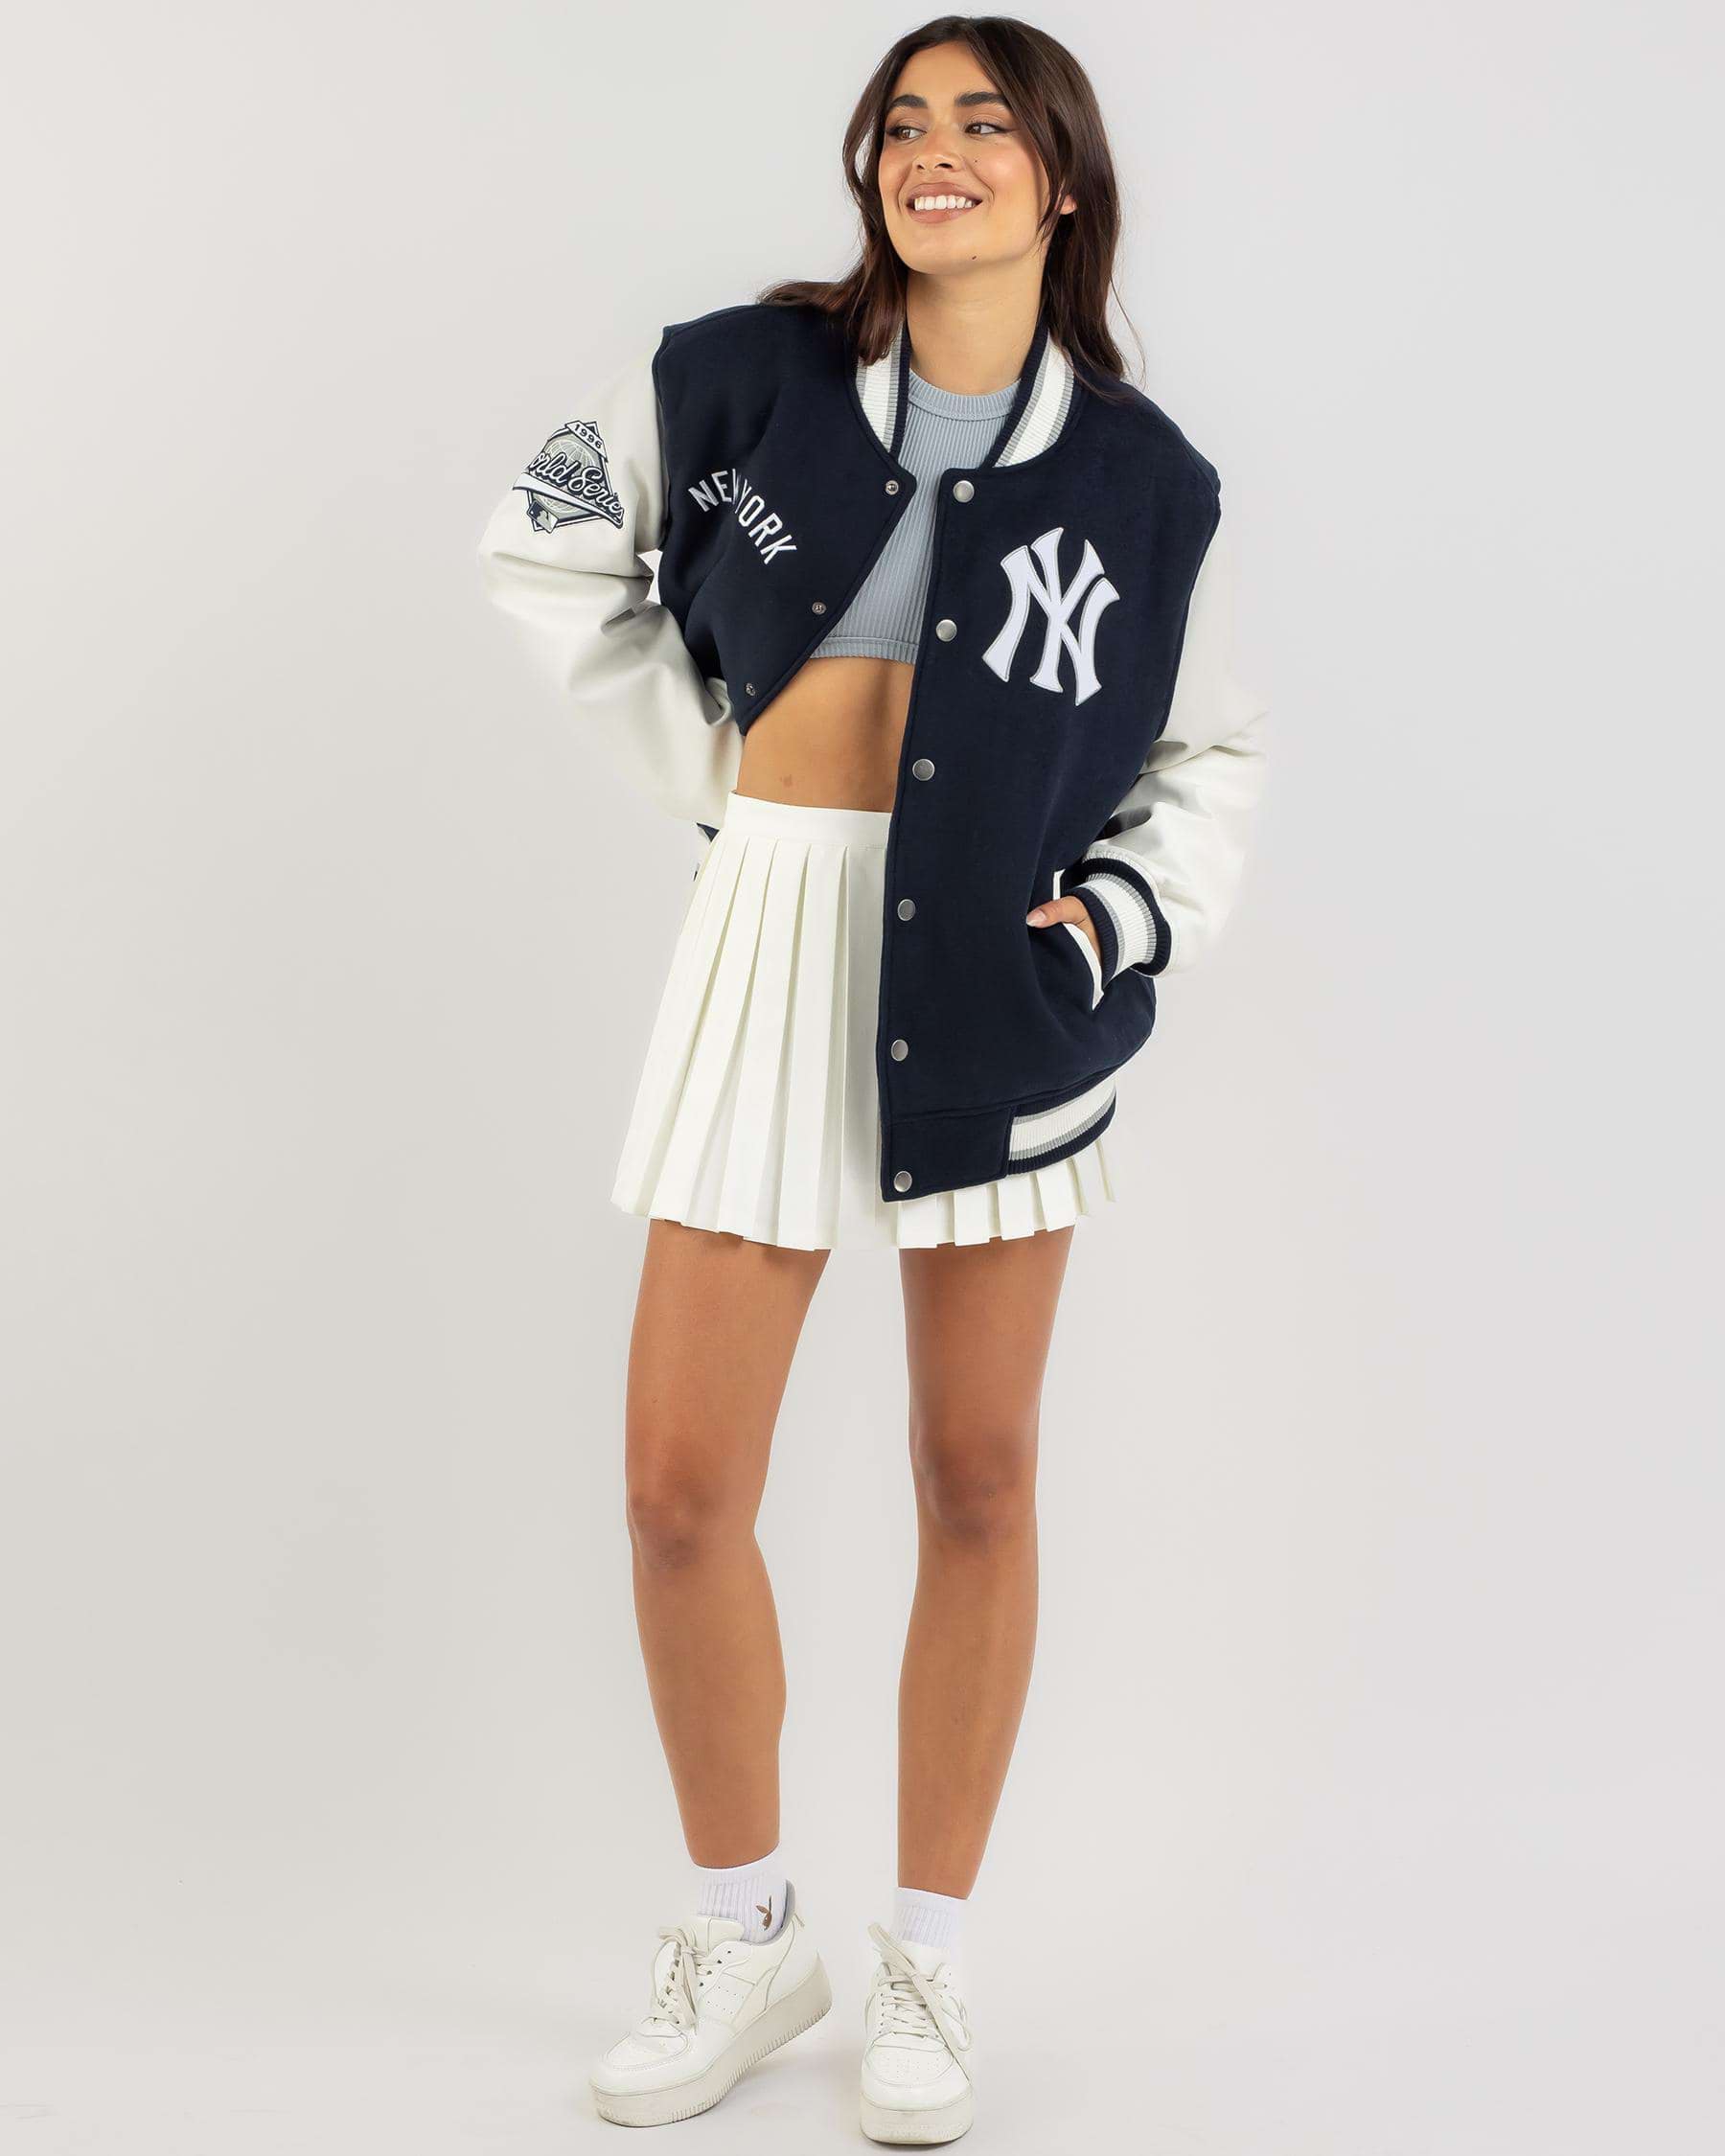 Majestic NY Yankees Letterman Jacket In Midnight Blue - Fast Shipping ...